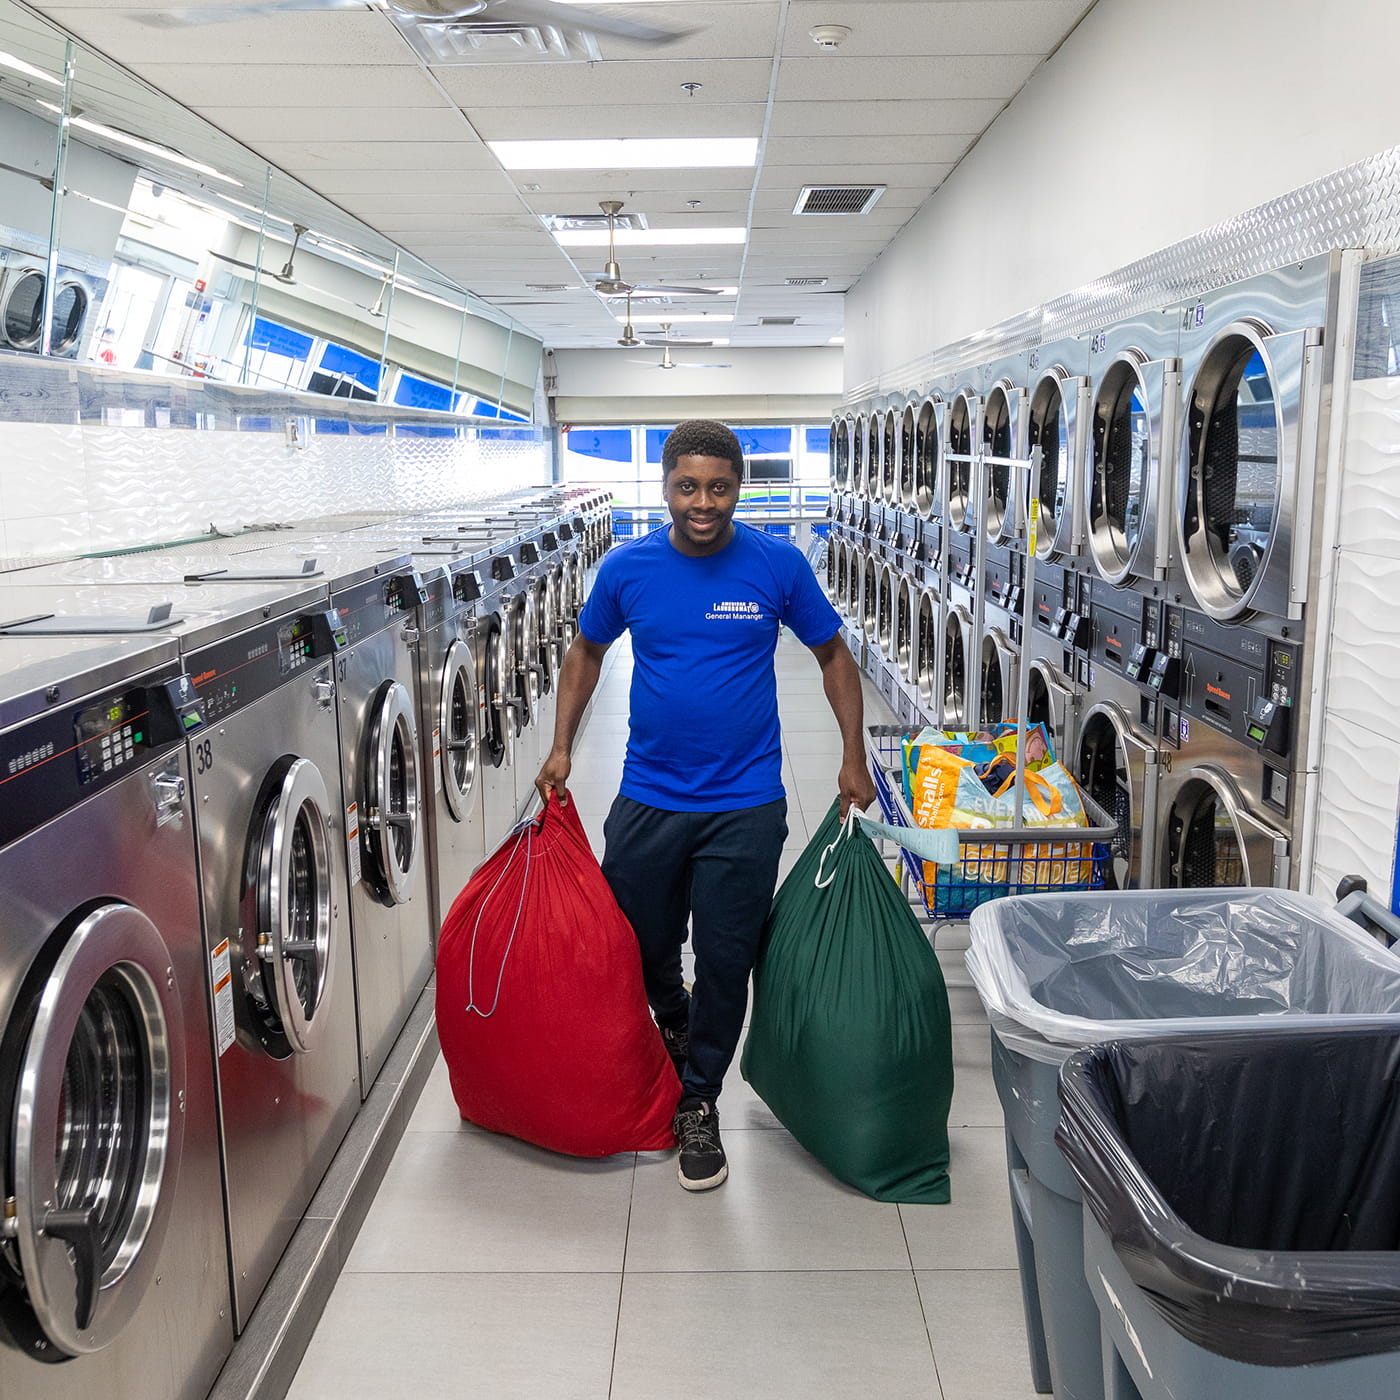 Jersey City Residential and Commercial Laundry Services